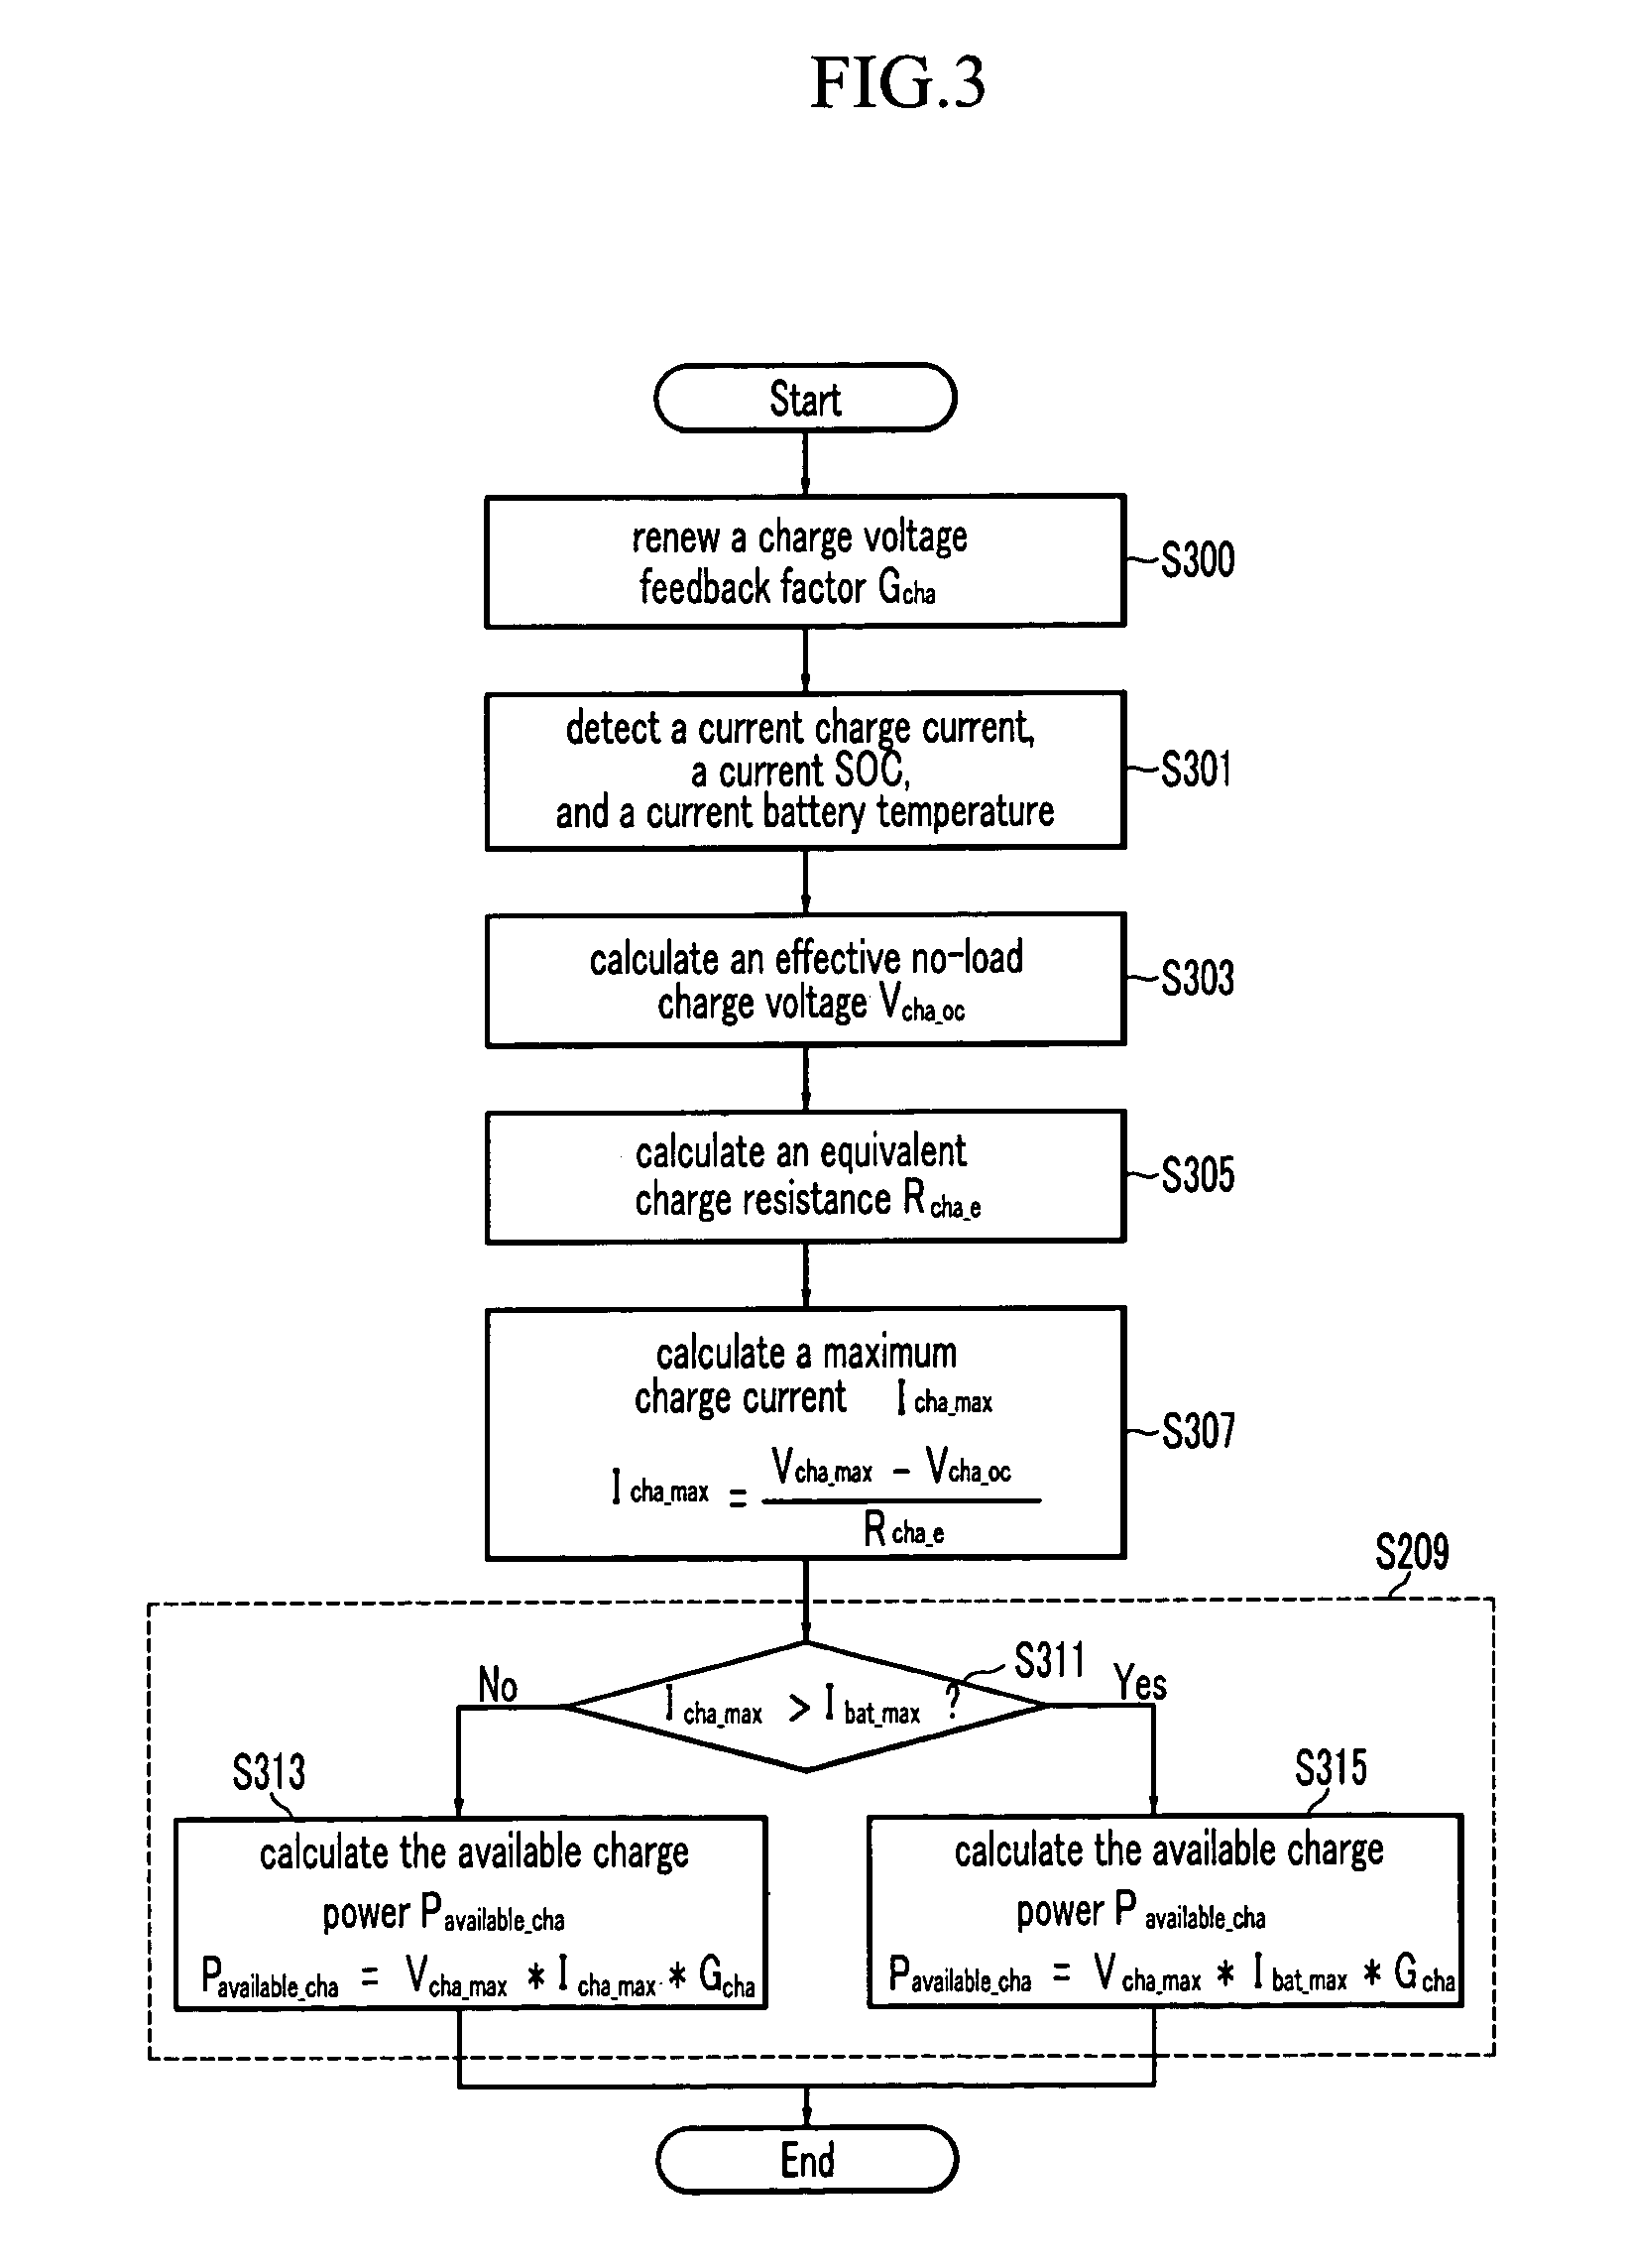 Method and system for calculating available power of a battery